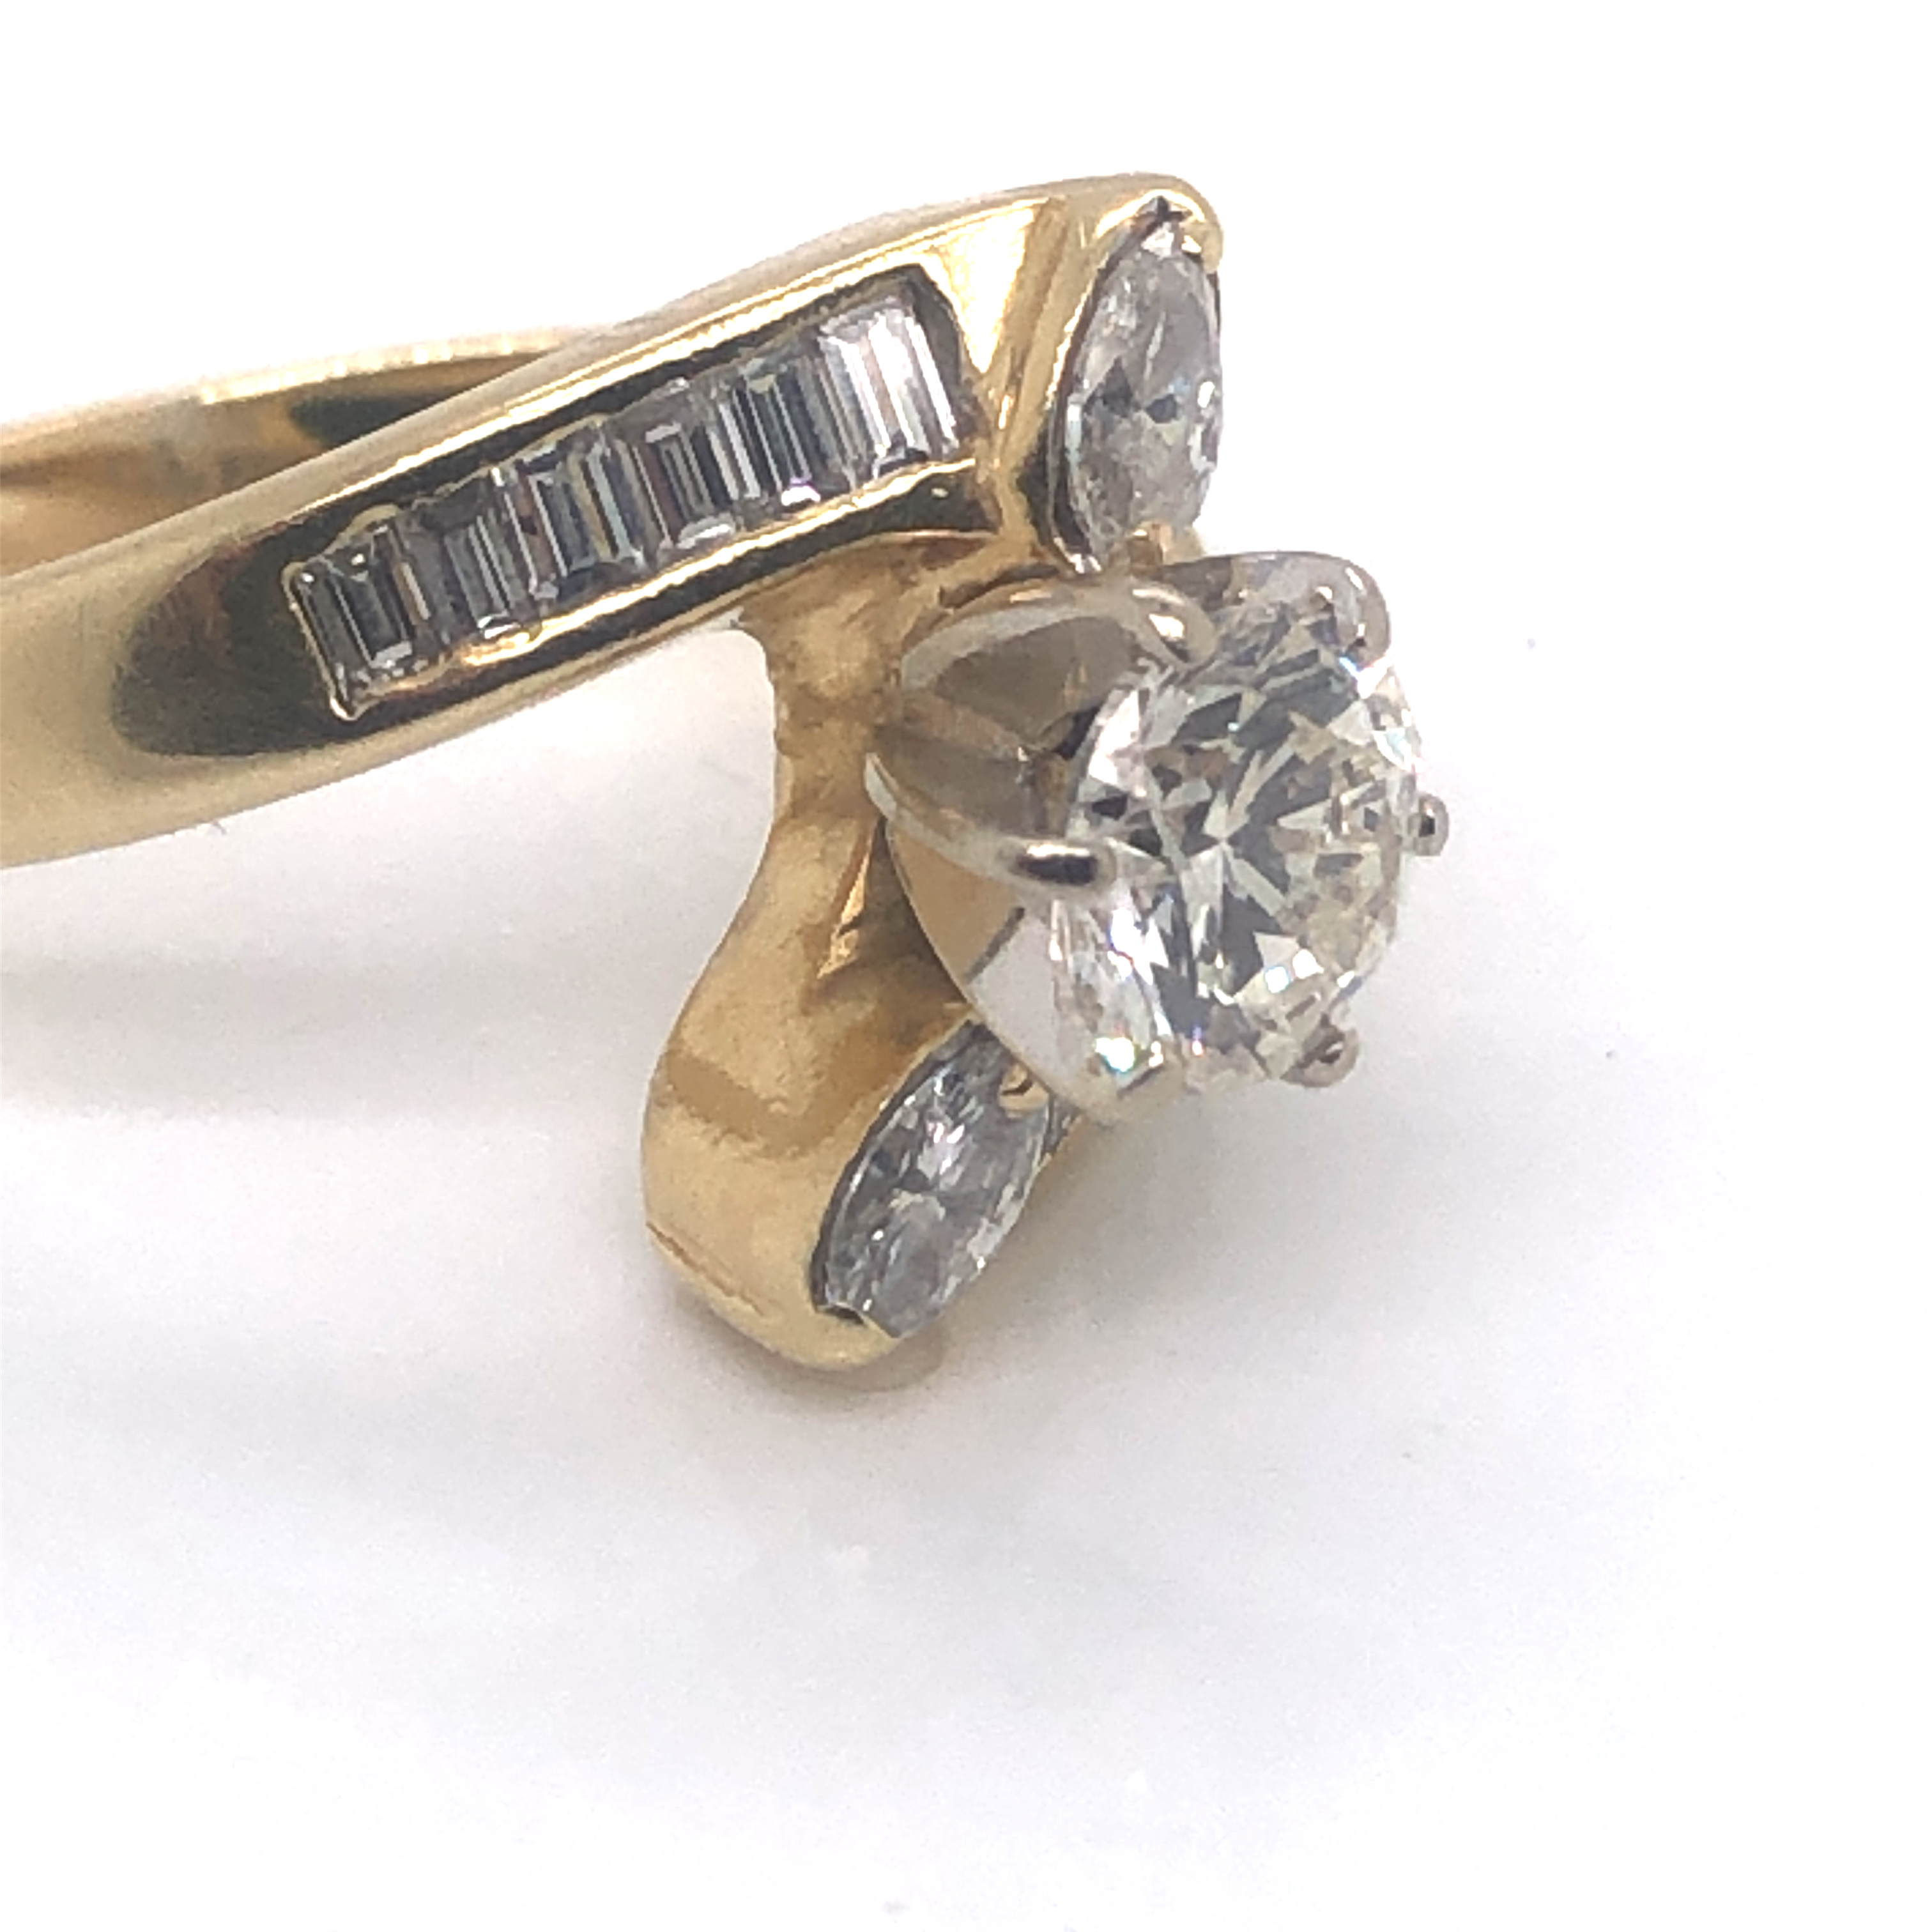 A DIAMOND BYPASS RING. THE CENTRAL ROUND BRILLIANT CUT DIAMOND IN A SIX CLAW SETTING, DIAMETER 6. - Image 2 of 2